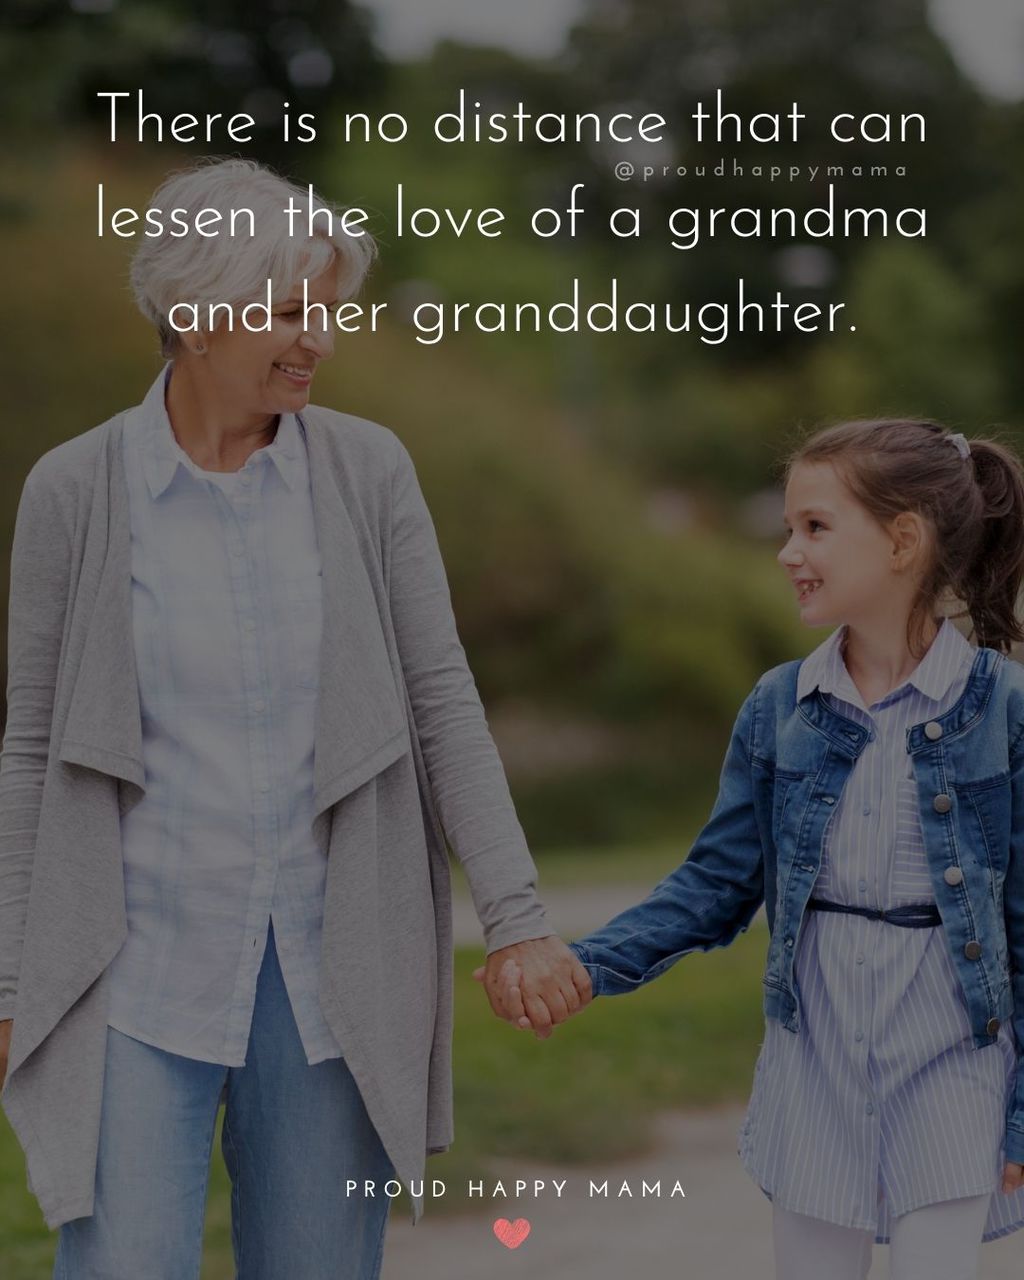 Granddaughter Quotes - There is no distance that can lessen the love of a grandma and her granddaughter.